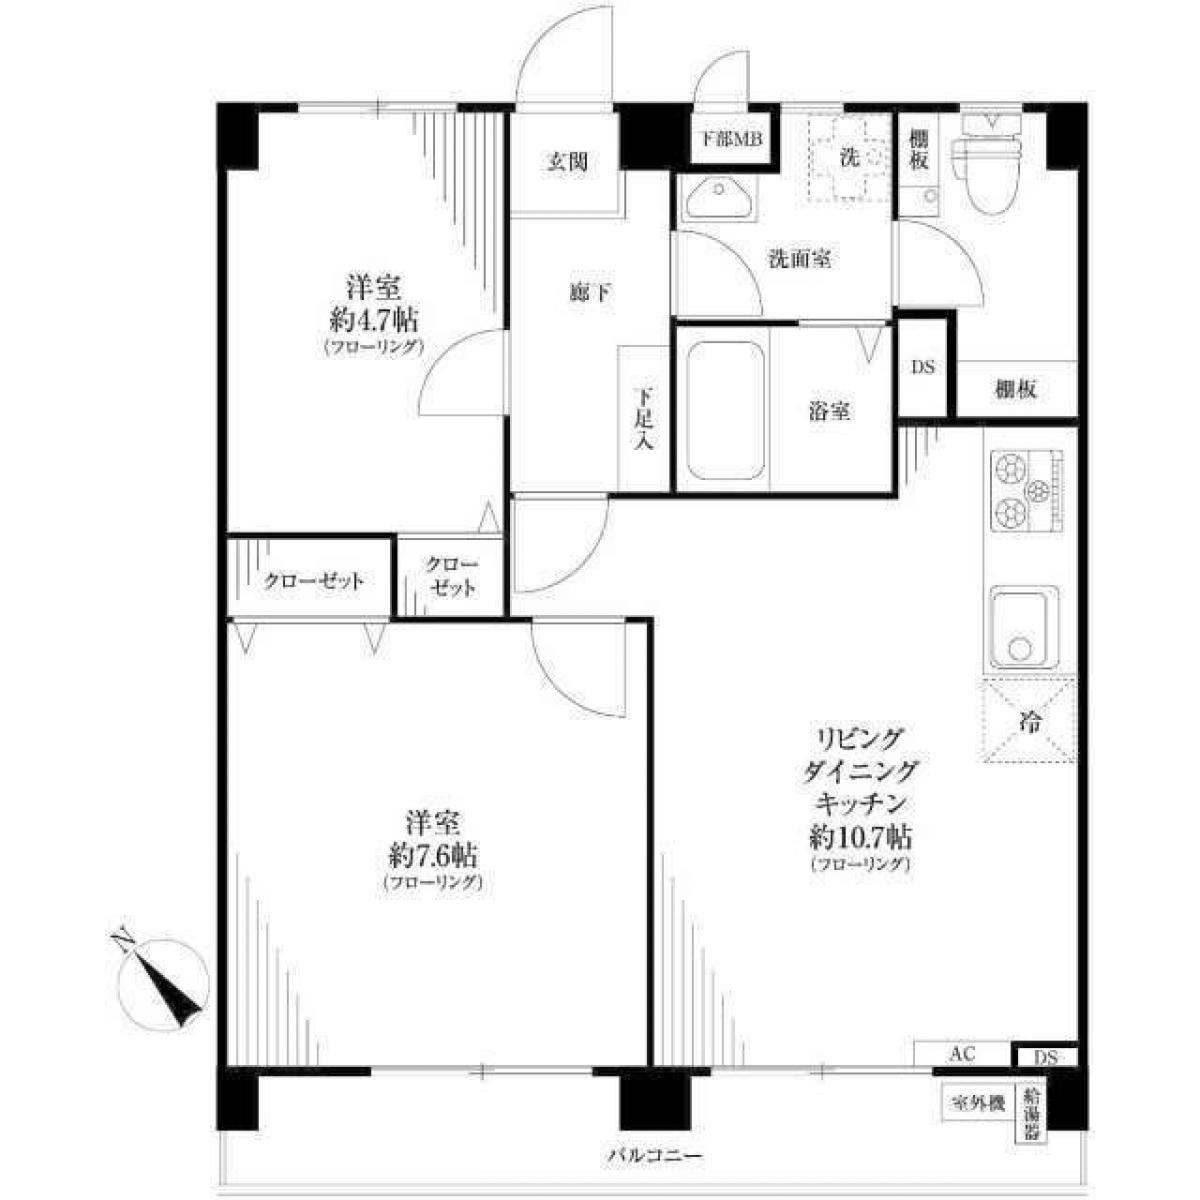 Picture of Apartment For Sale in Ichikawa Shi, Chiba, Japan